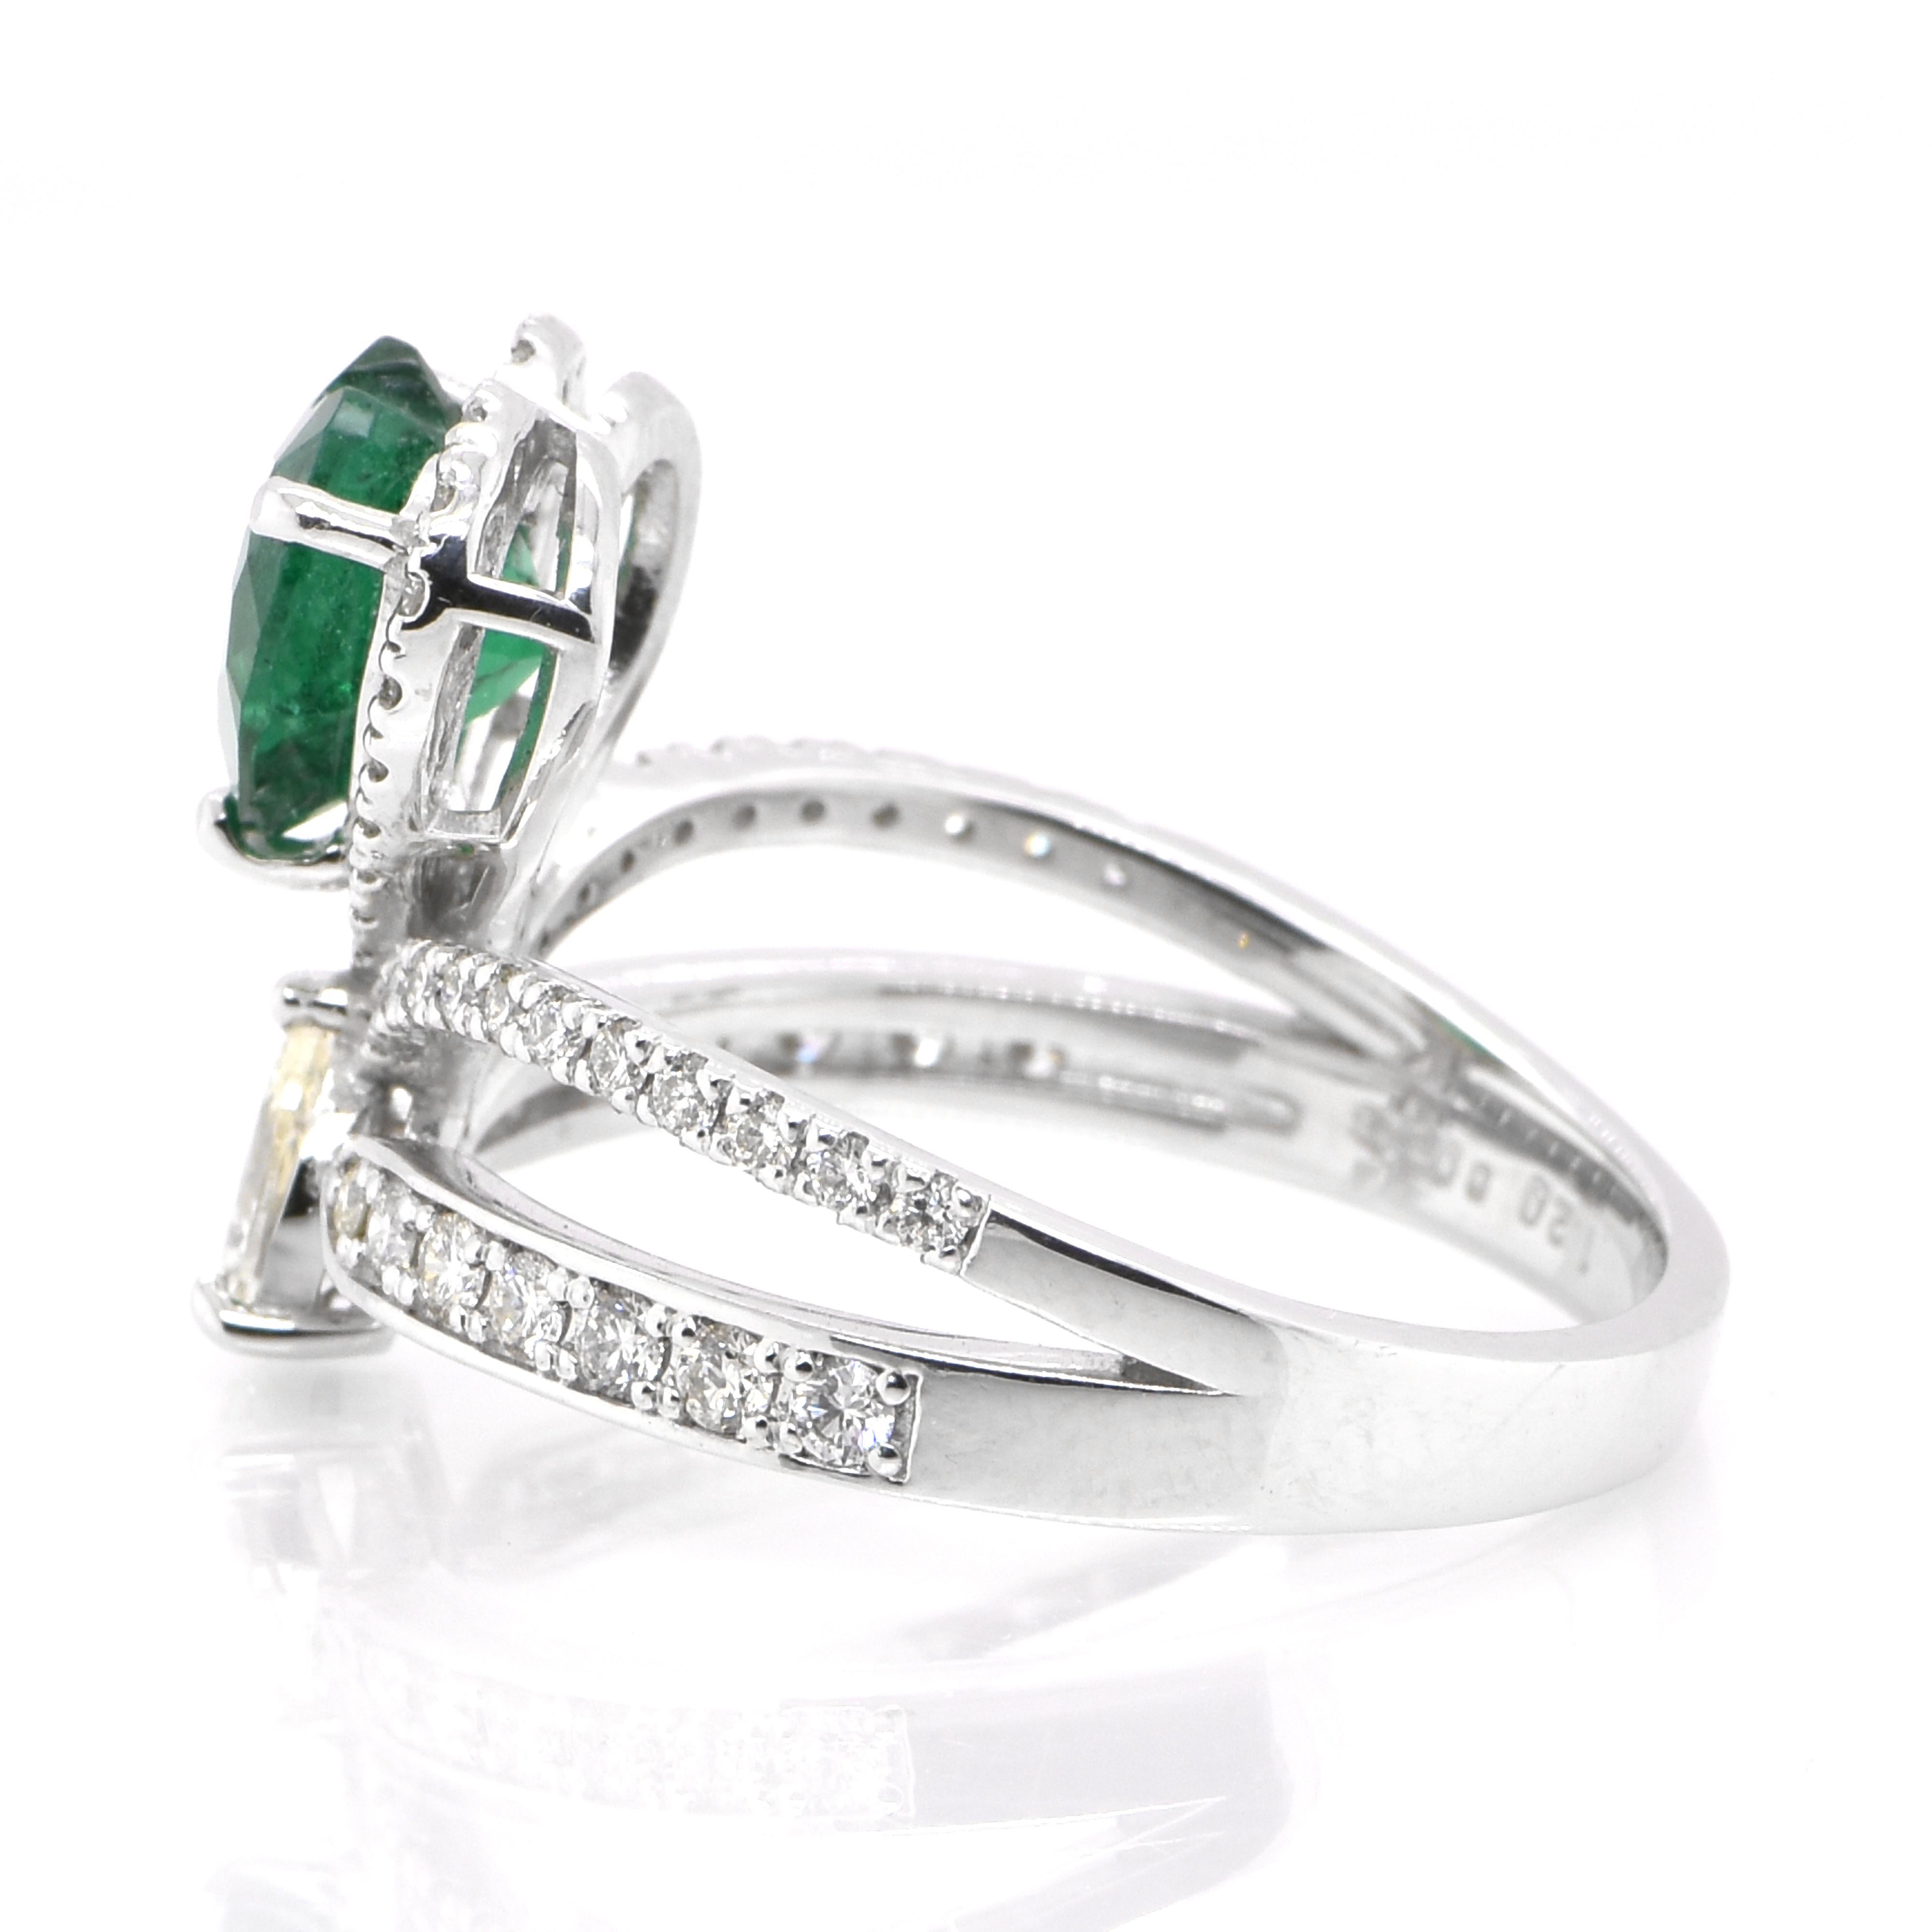 Heart Cut 1.20 Carat Heart-Cut, Zambian Emerald and Diamond Crown Ring Set in Platinum For Sale